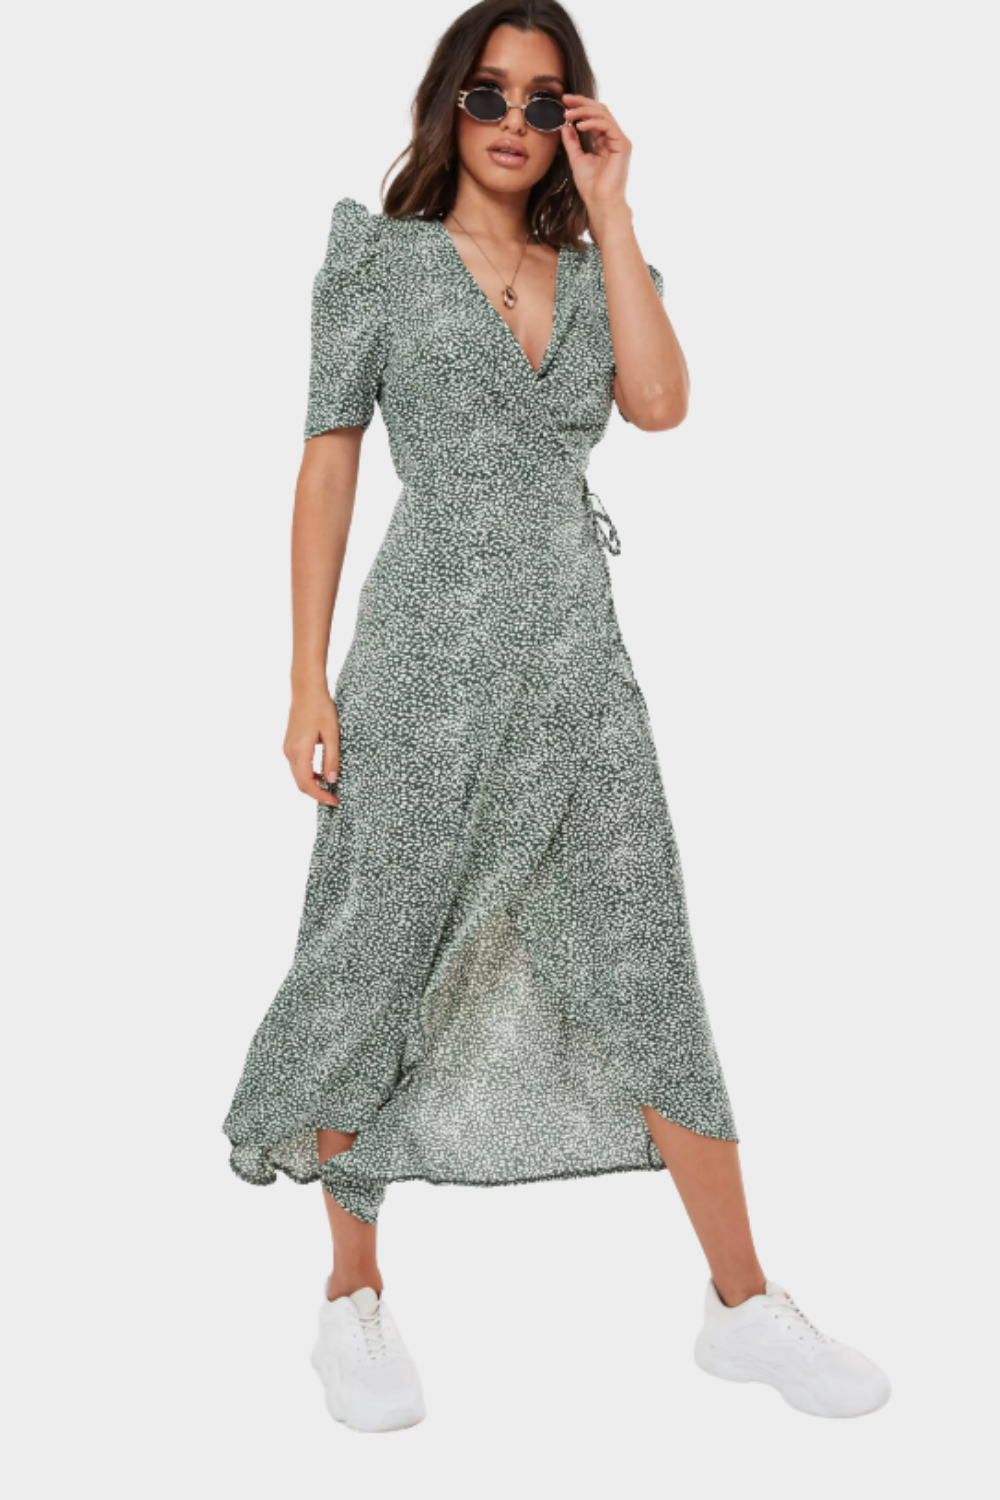 THE MOST BEAUTIFUL, AFFORDABLE LONG DRESSES FOR SPRING SUMMER 2021